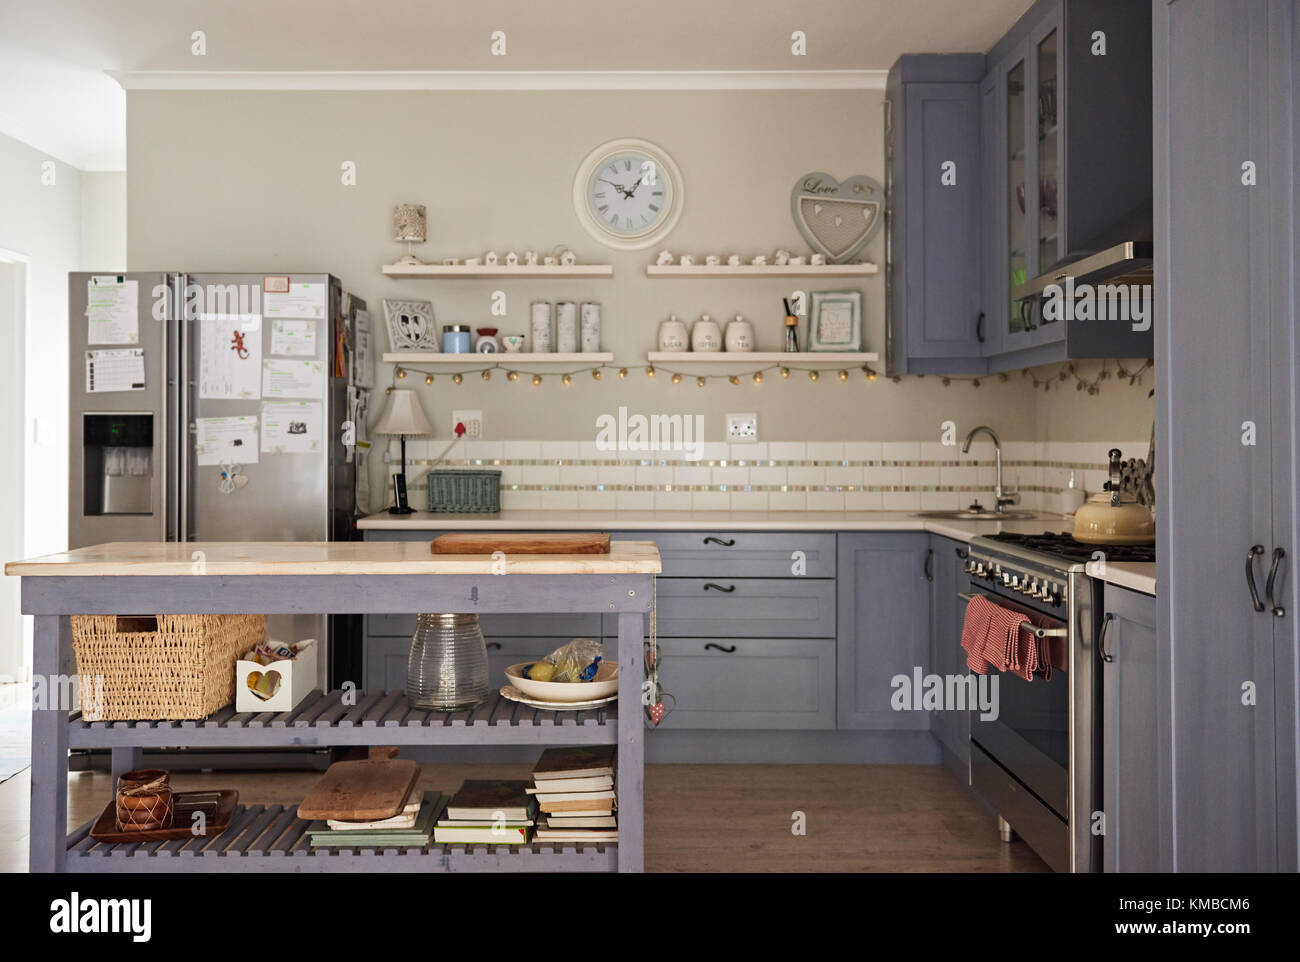 Interior of kitchen area in a country style home Stock Photo